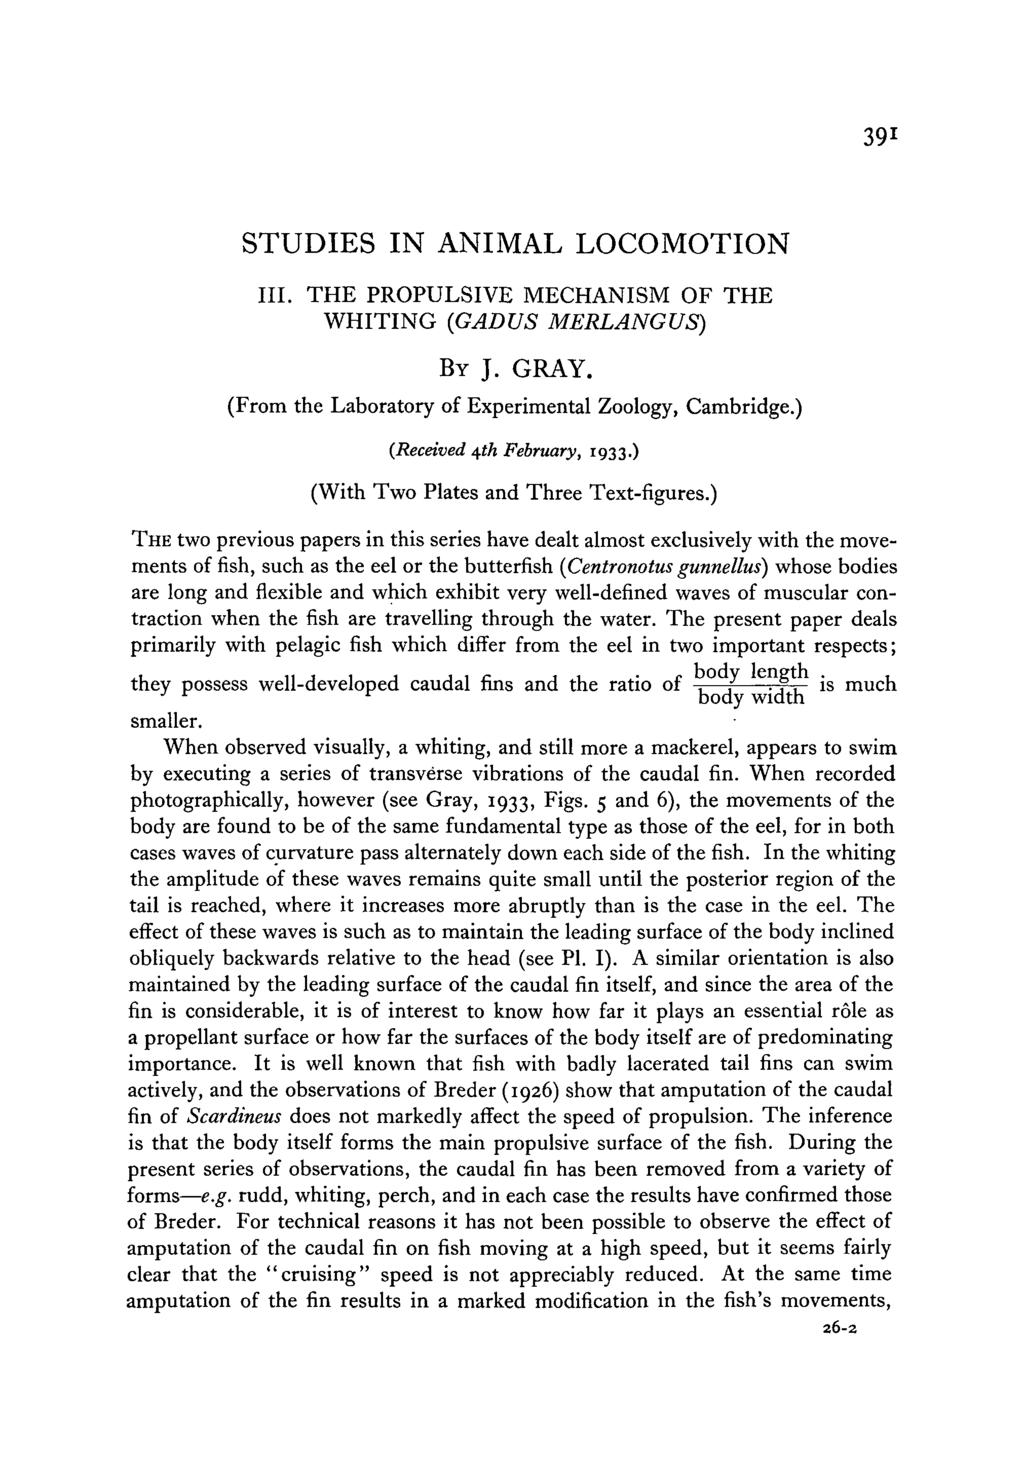 39 1 STUDIES IN ANIMAL LOCOMOTION III. THE PROPULSIVE MECHANISM OF THE WHITING (GADUS MERLANGUS) BY J. GRAY. (From the Laboratory of Experimental Zoology, Cambridge.) {Received ^th February, 1933.